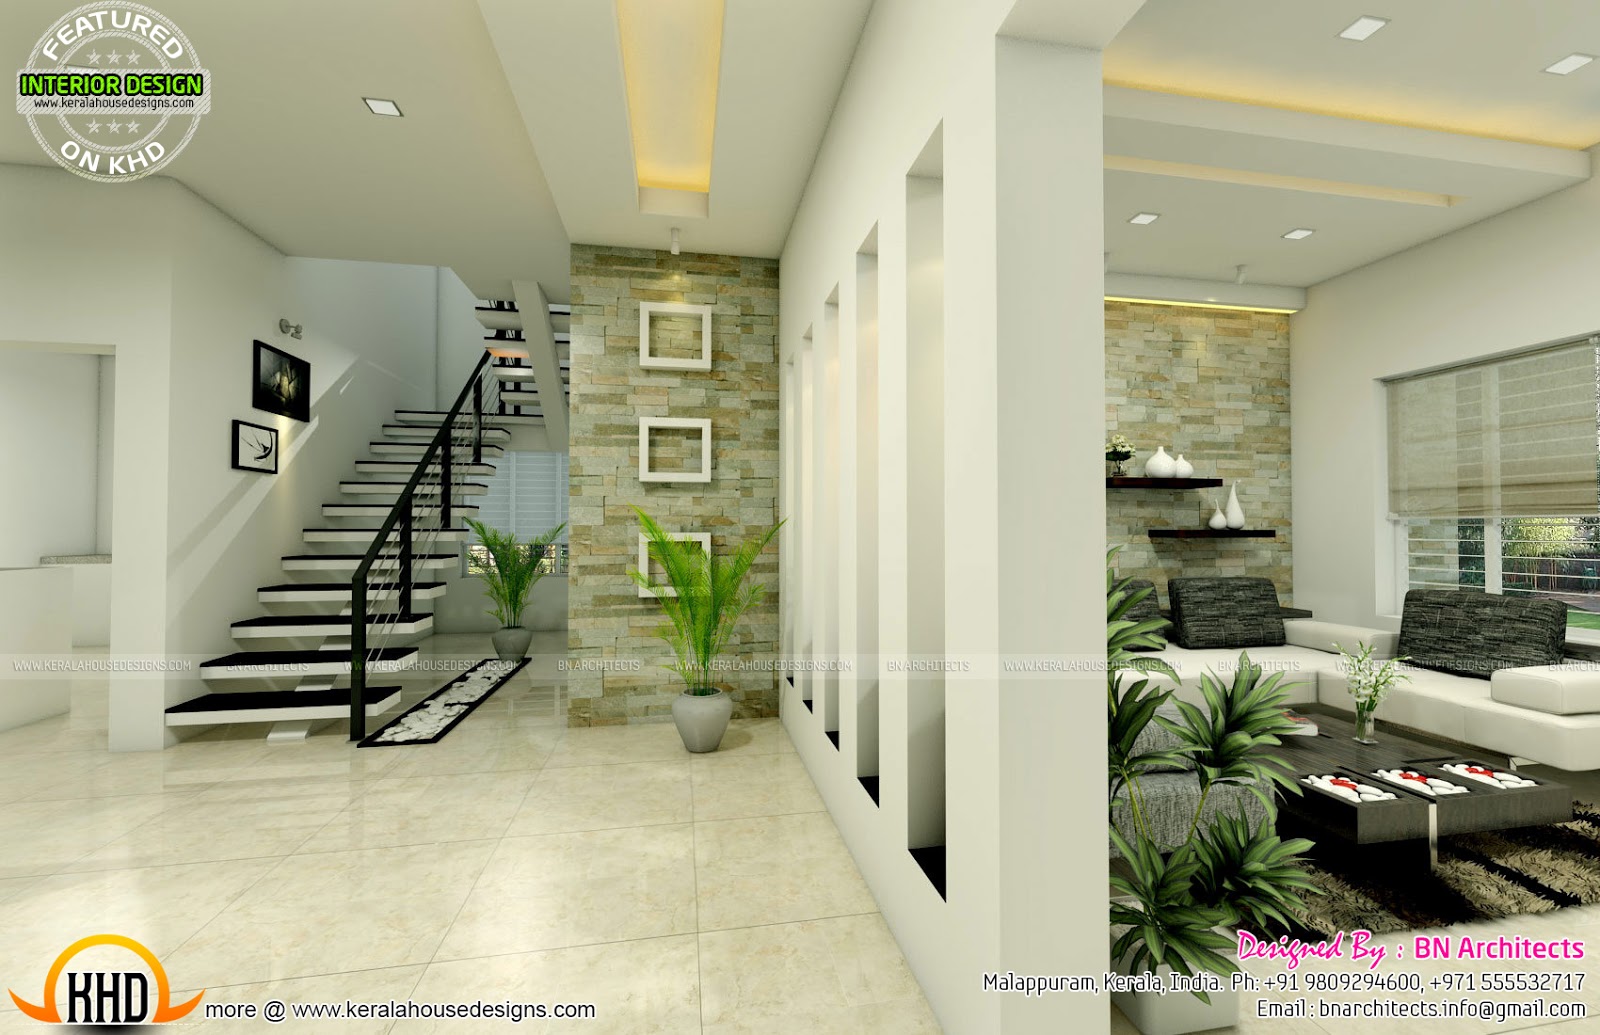 All in one : House elevation, floor plan and interiors ...